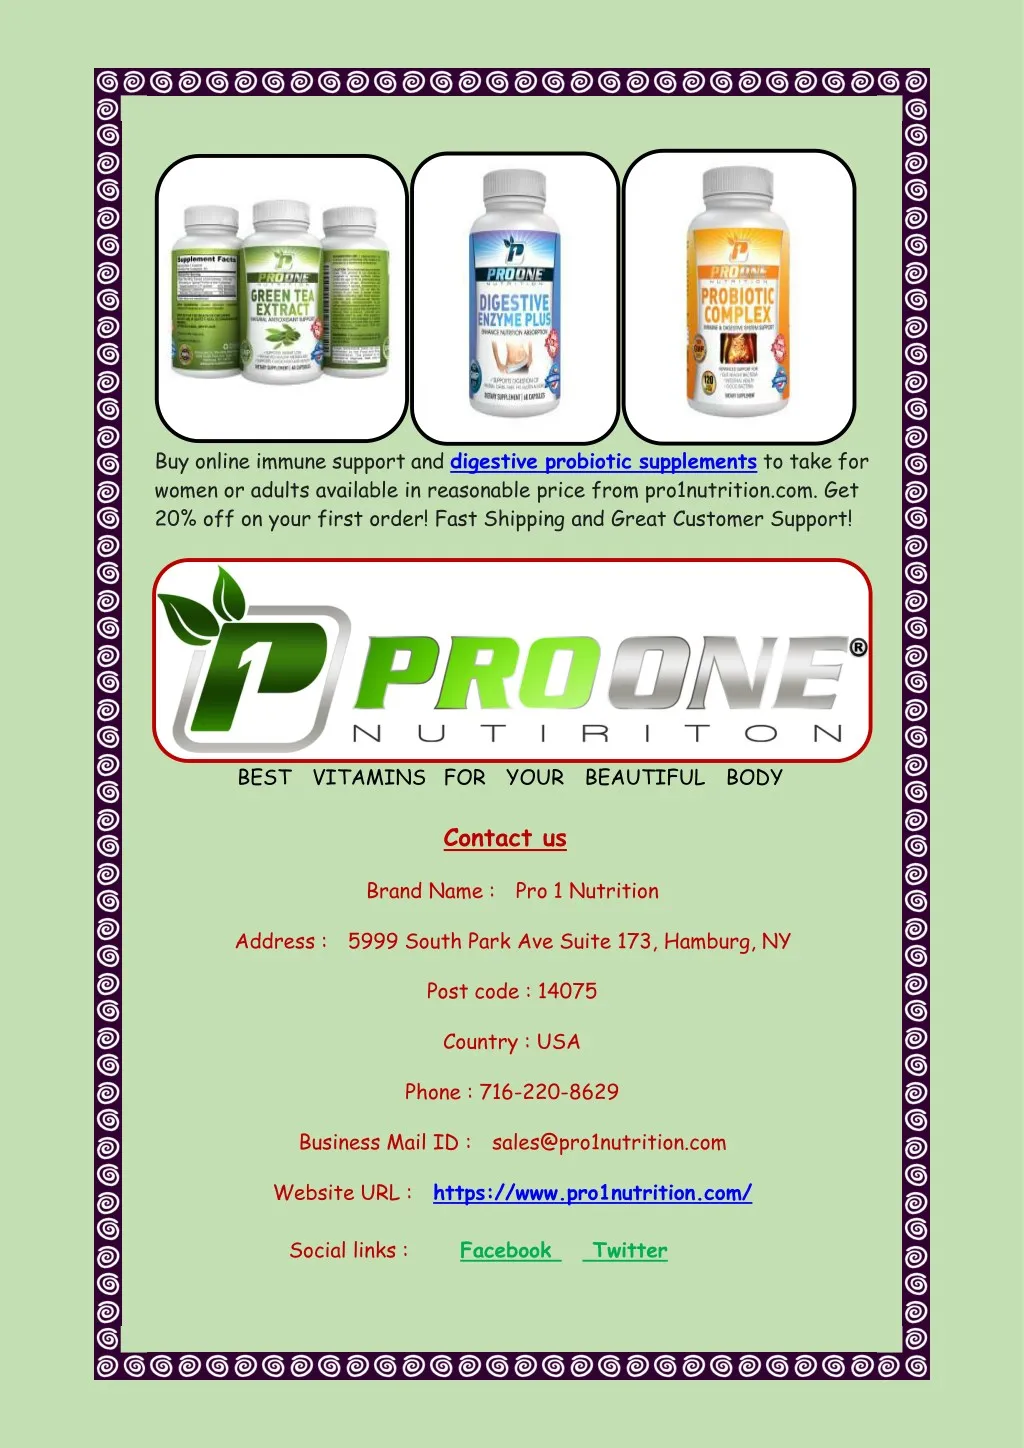 buy online immune support and digestive probiotic